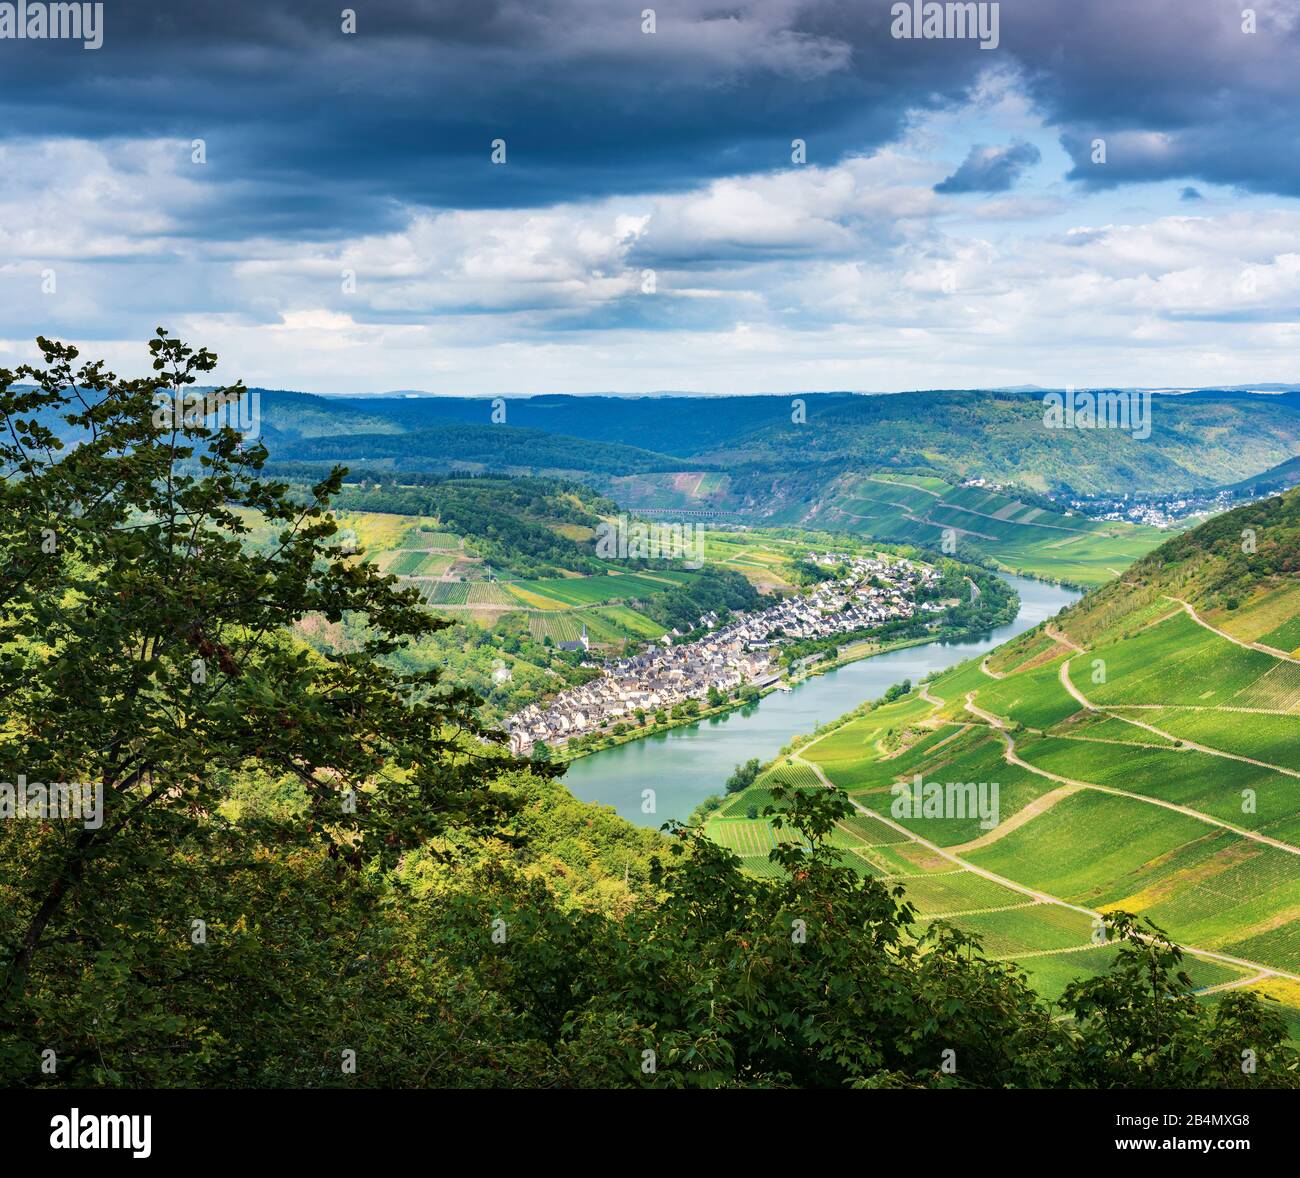 Germany, Rhineland-Palatinate, Zell (Mosel), view of the Moselle valley to the wine town of Briedel and vineyards Stock Photo